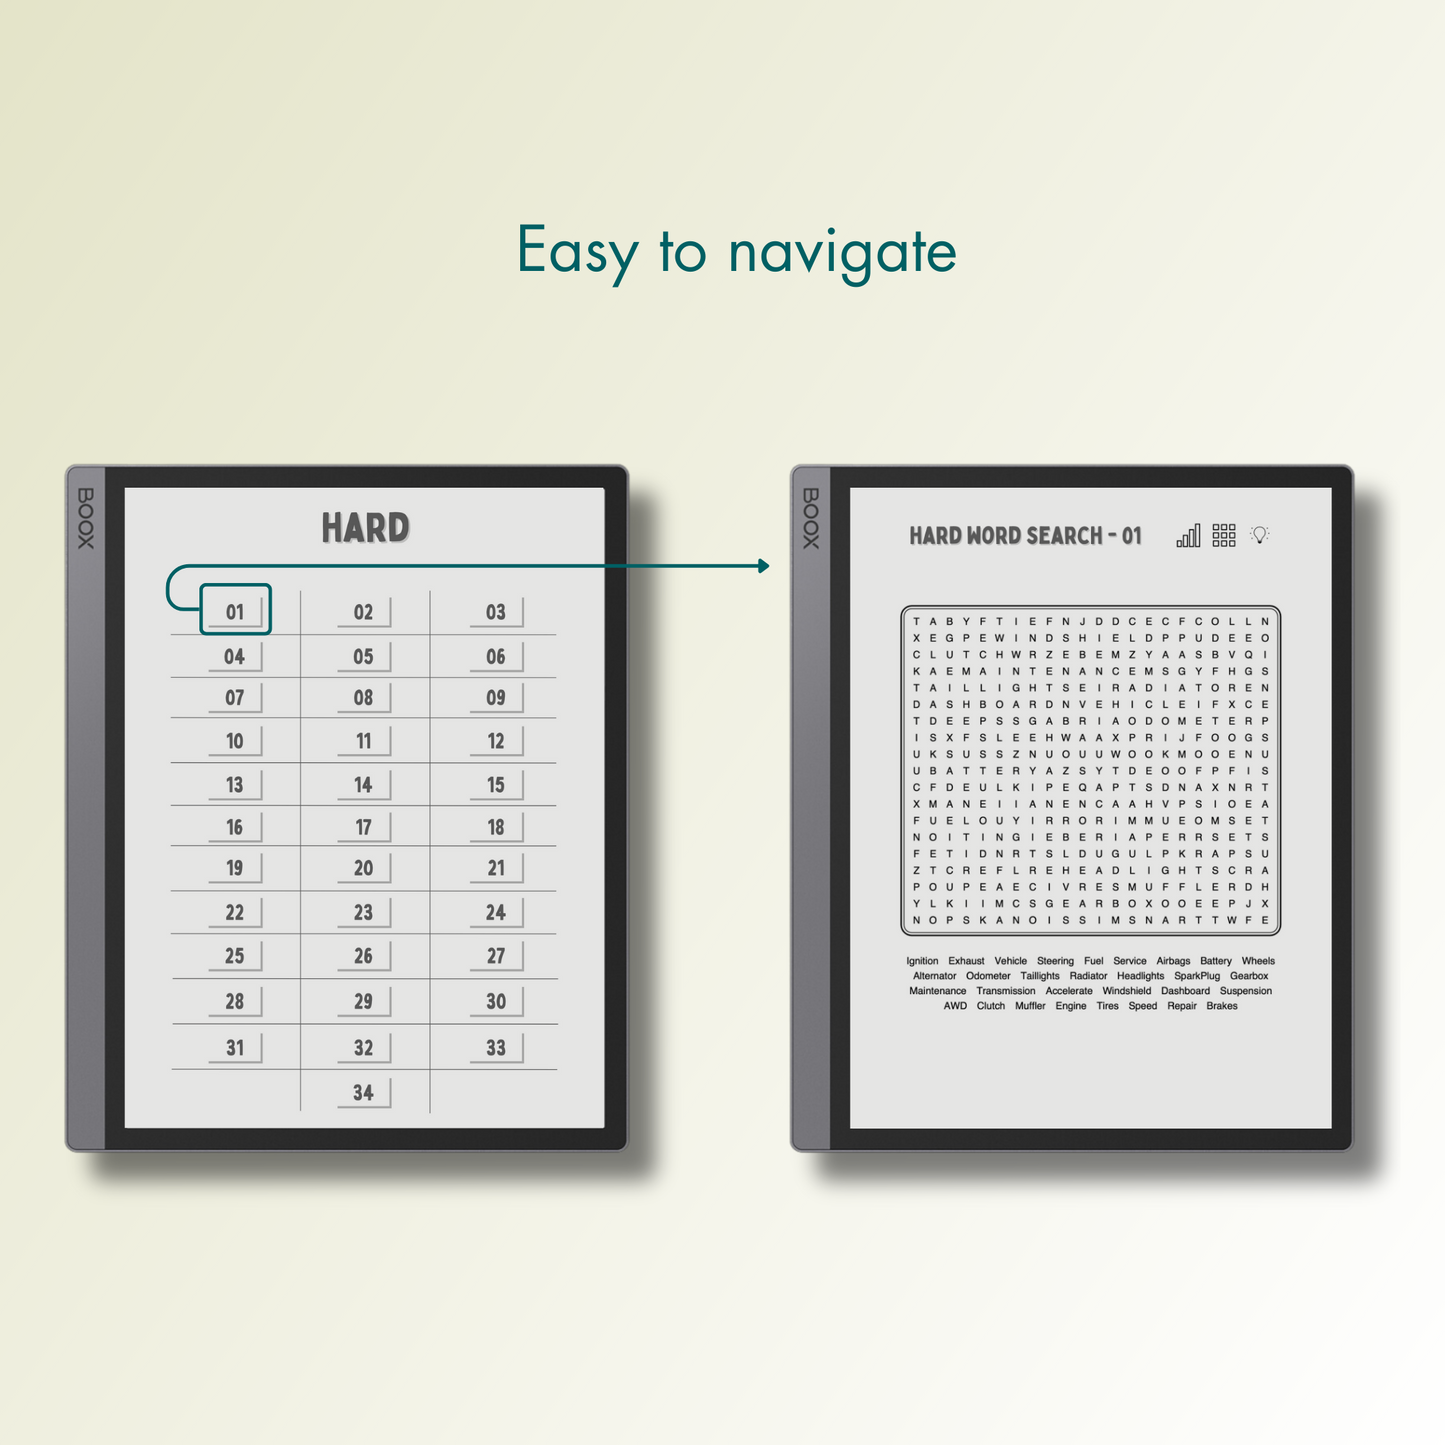 Onyx Boox Word Search Puzzles with easy navigations.